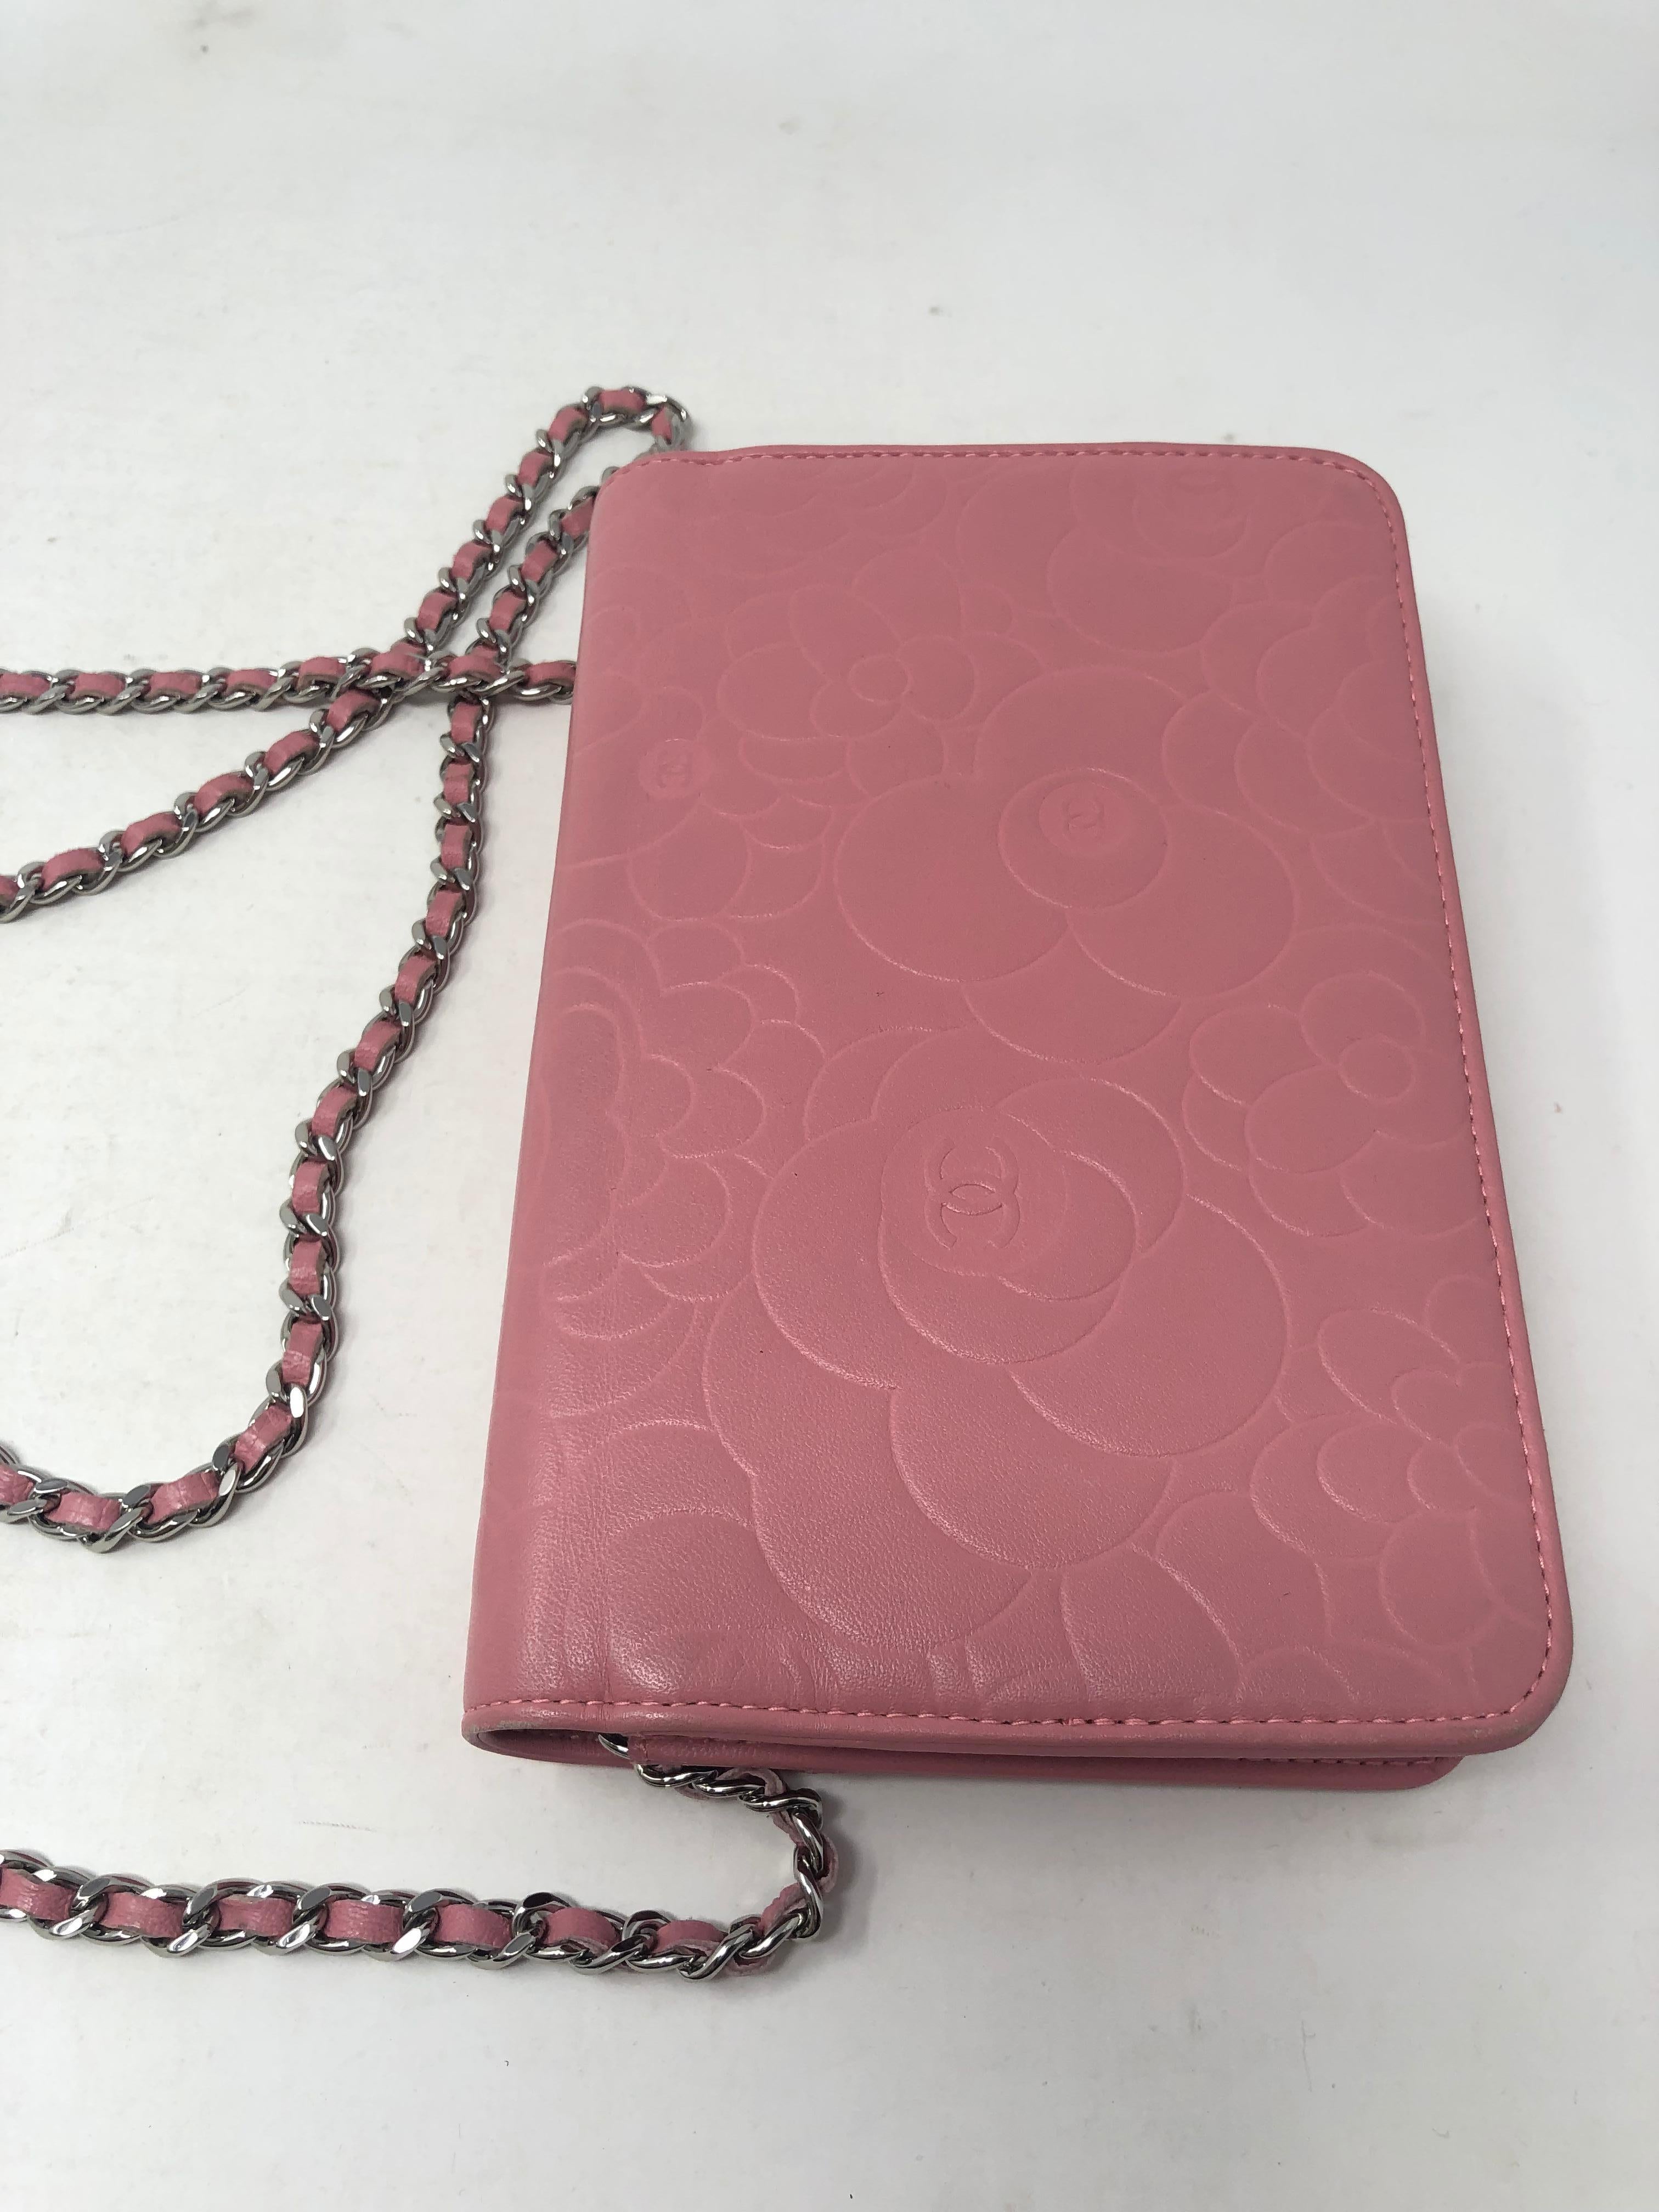 Chanel Pink Wallet On A Chain Crossbody  6